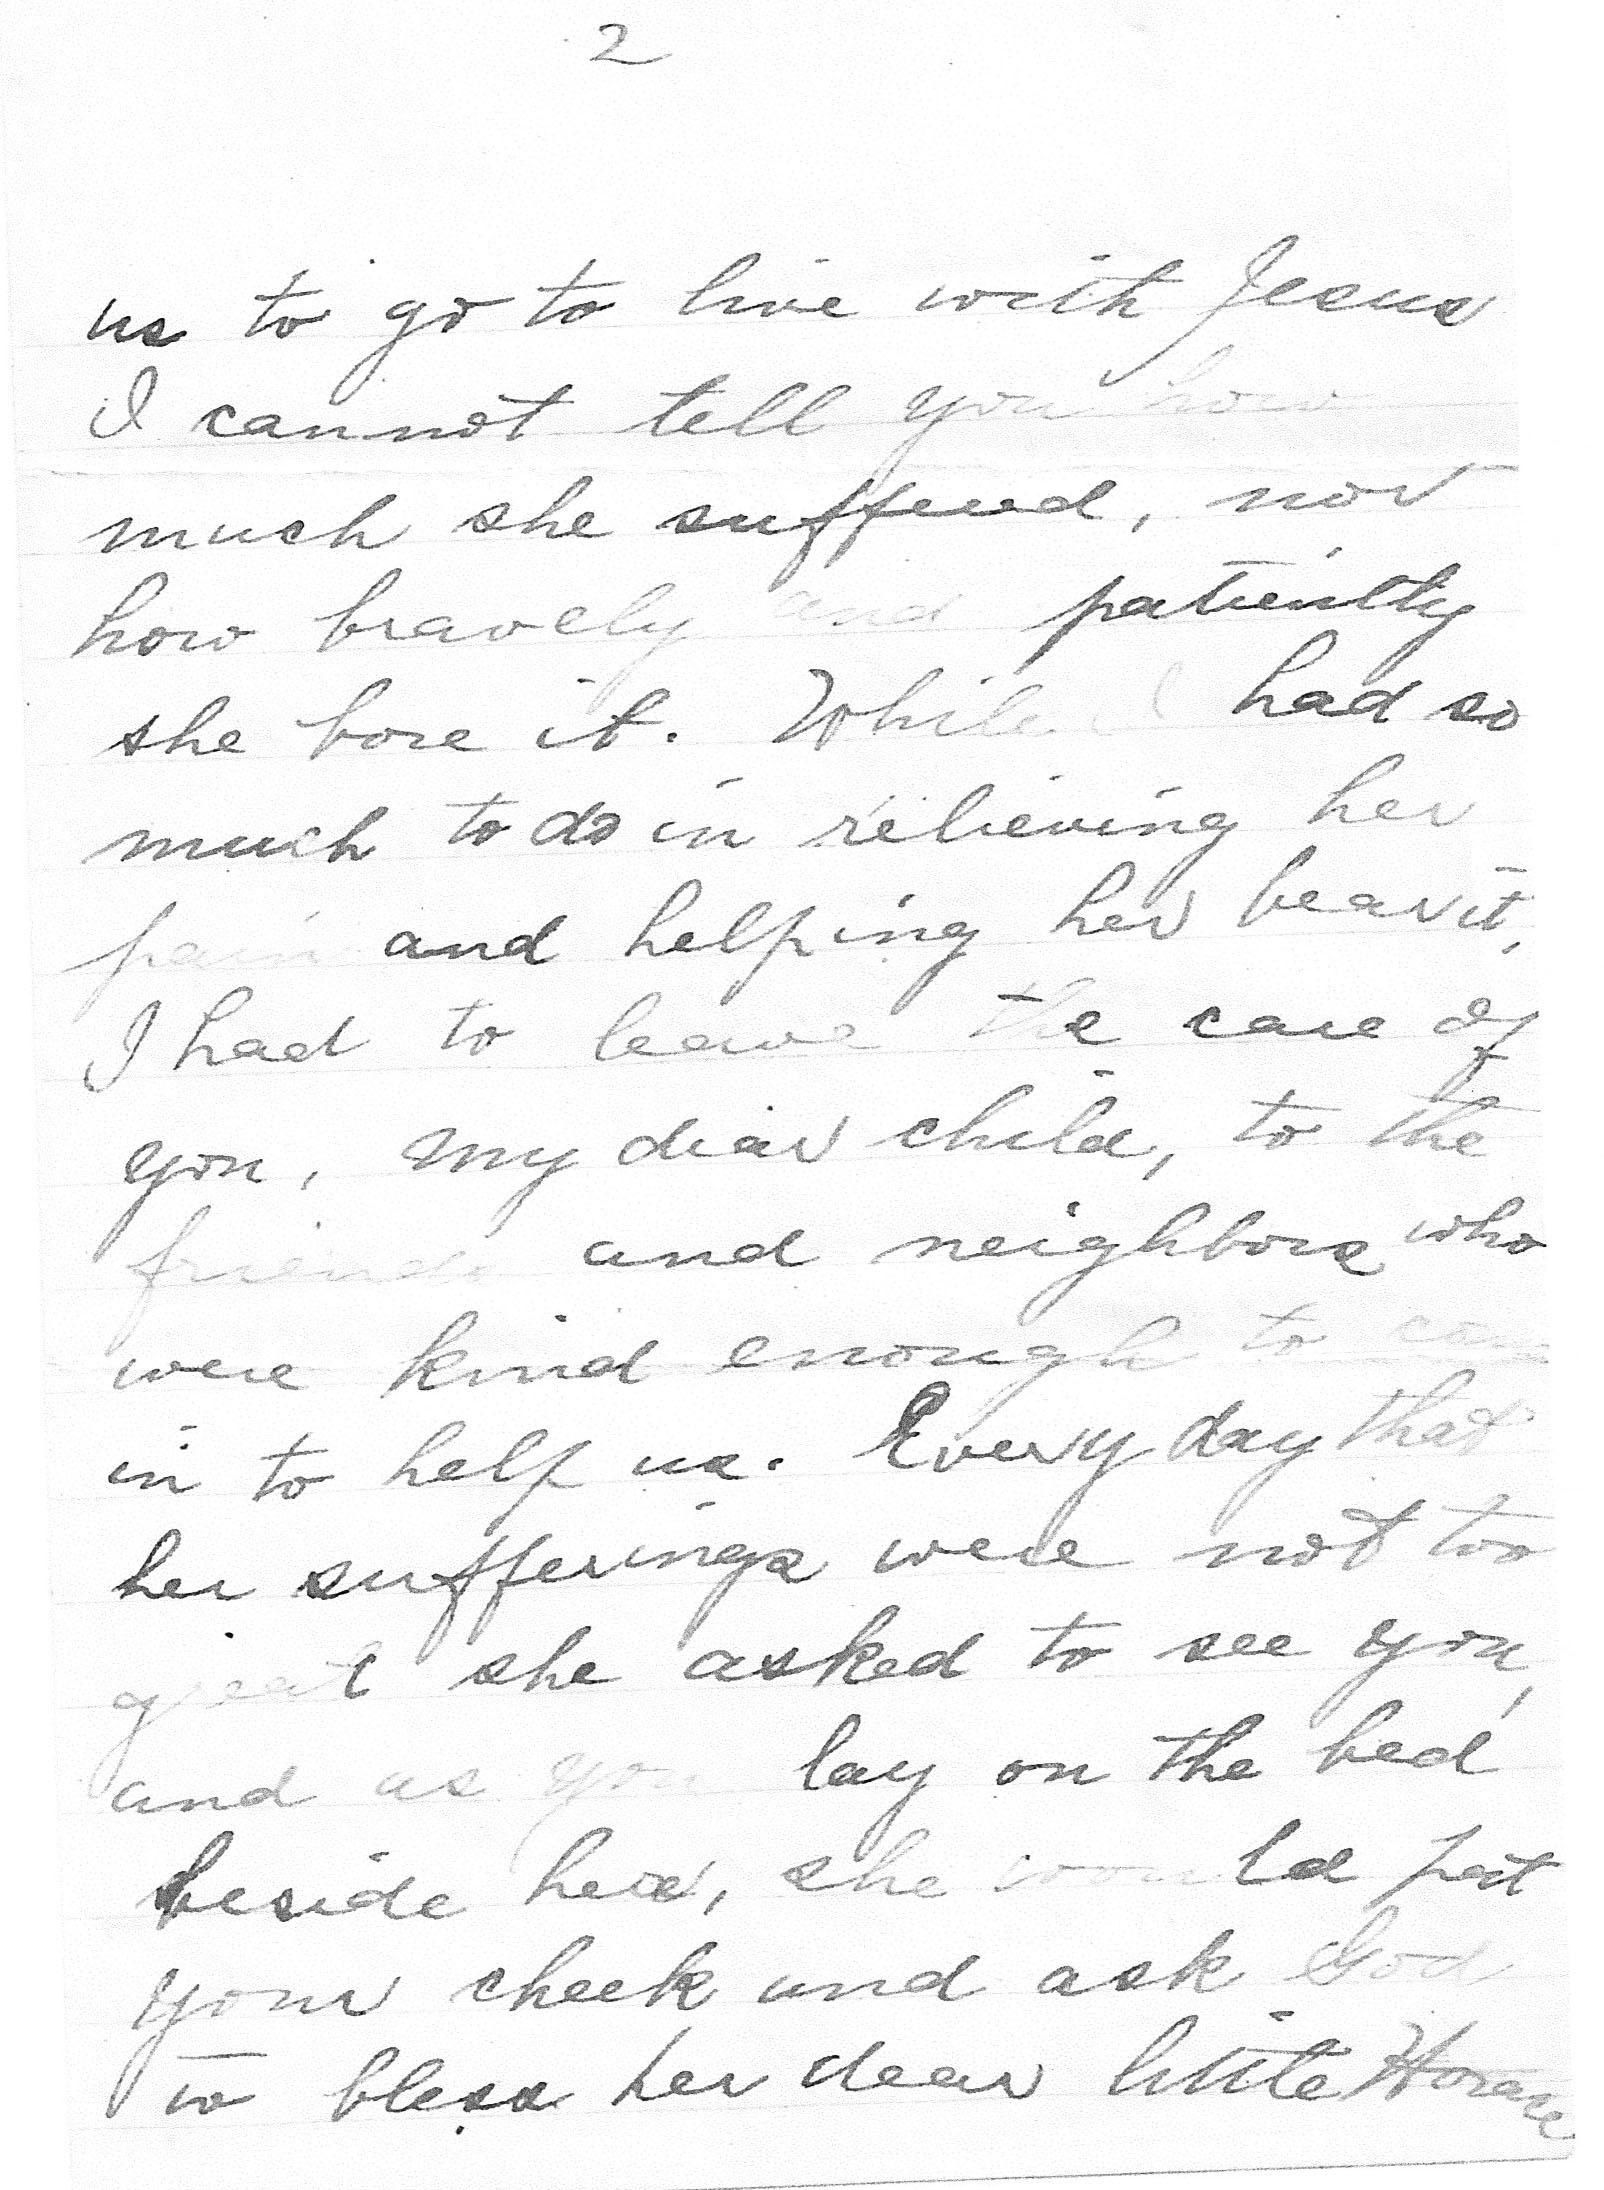 Letter to Horace page 3